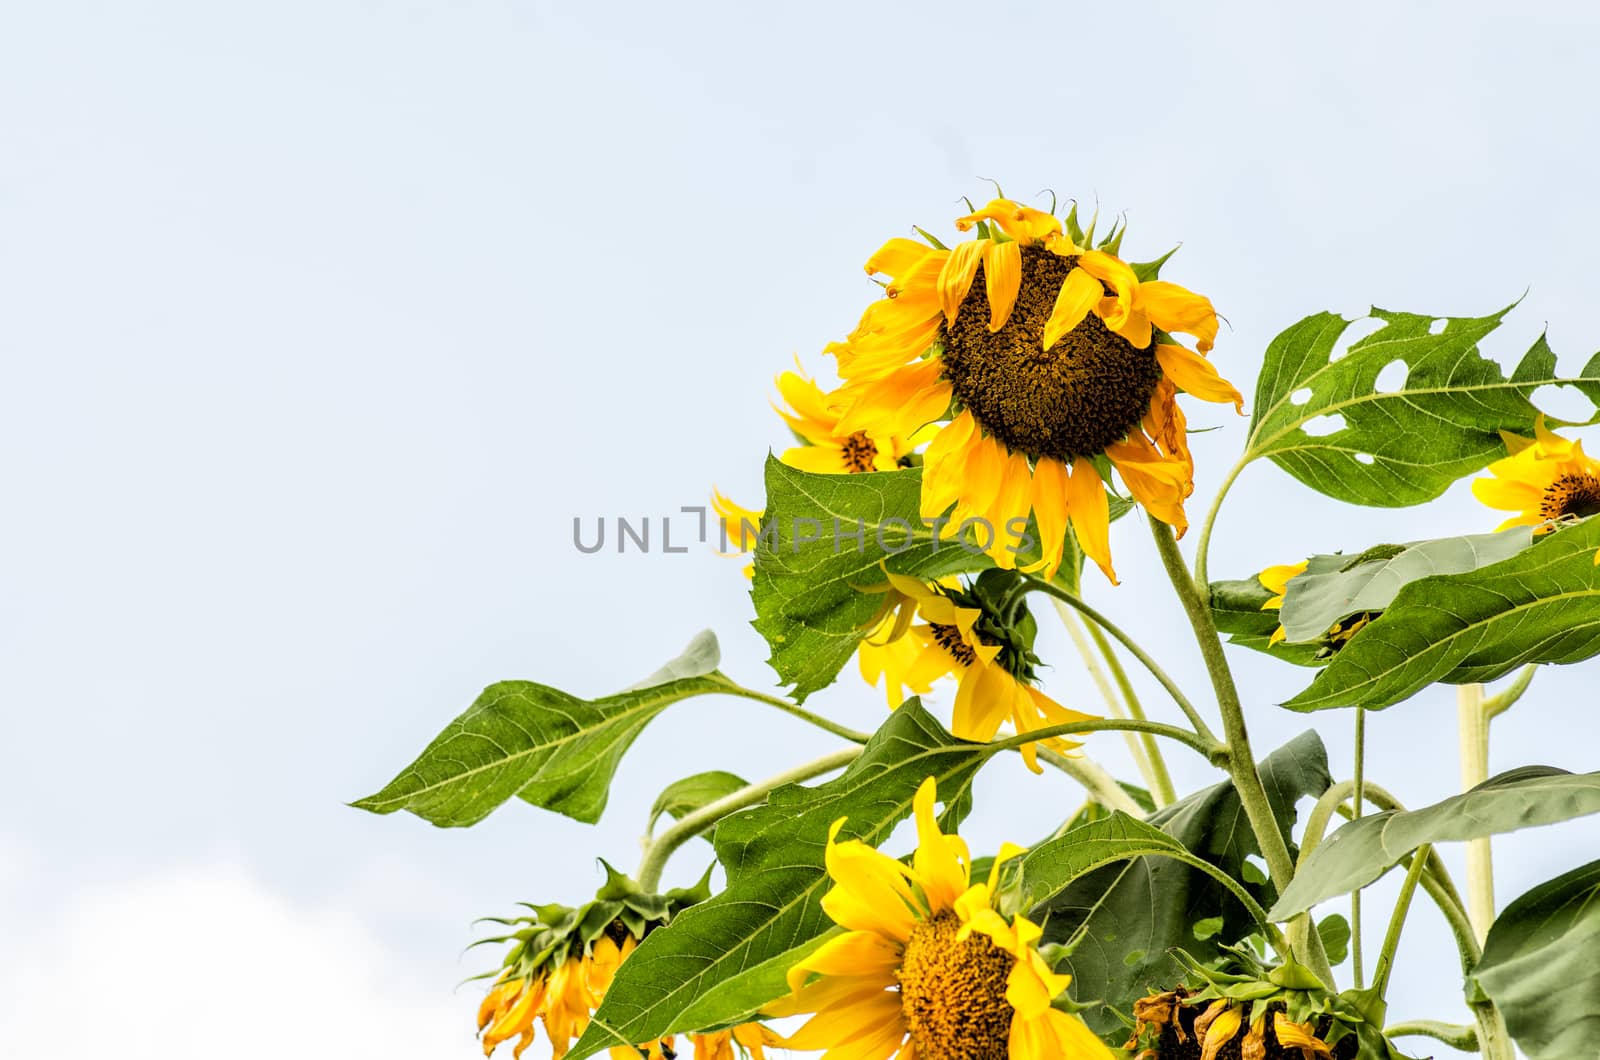 sunflowers on the nature background